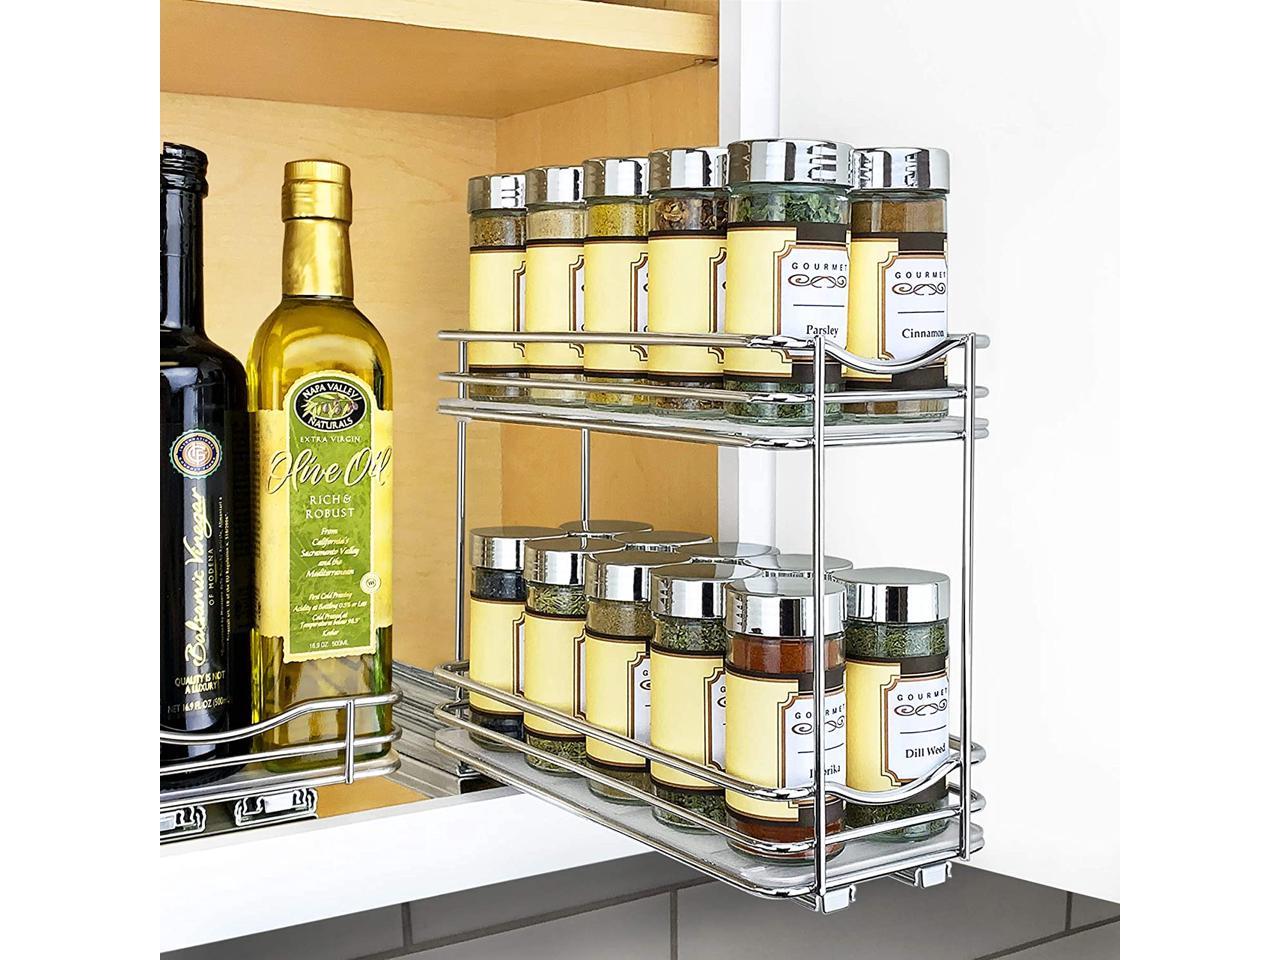 Professional Slide Out Double Spice Rack Upper Cabinet Organizer, 4-1/4", Chrome